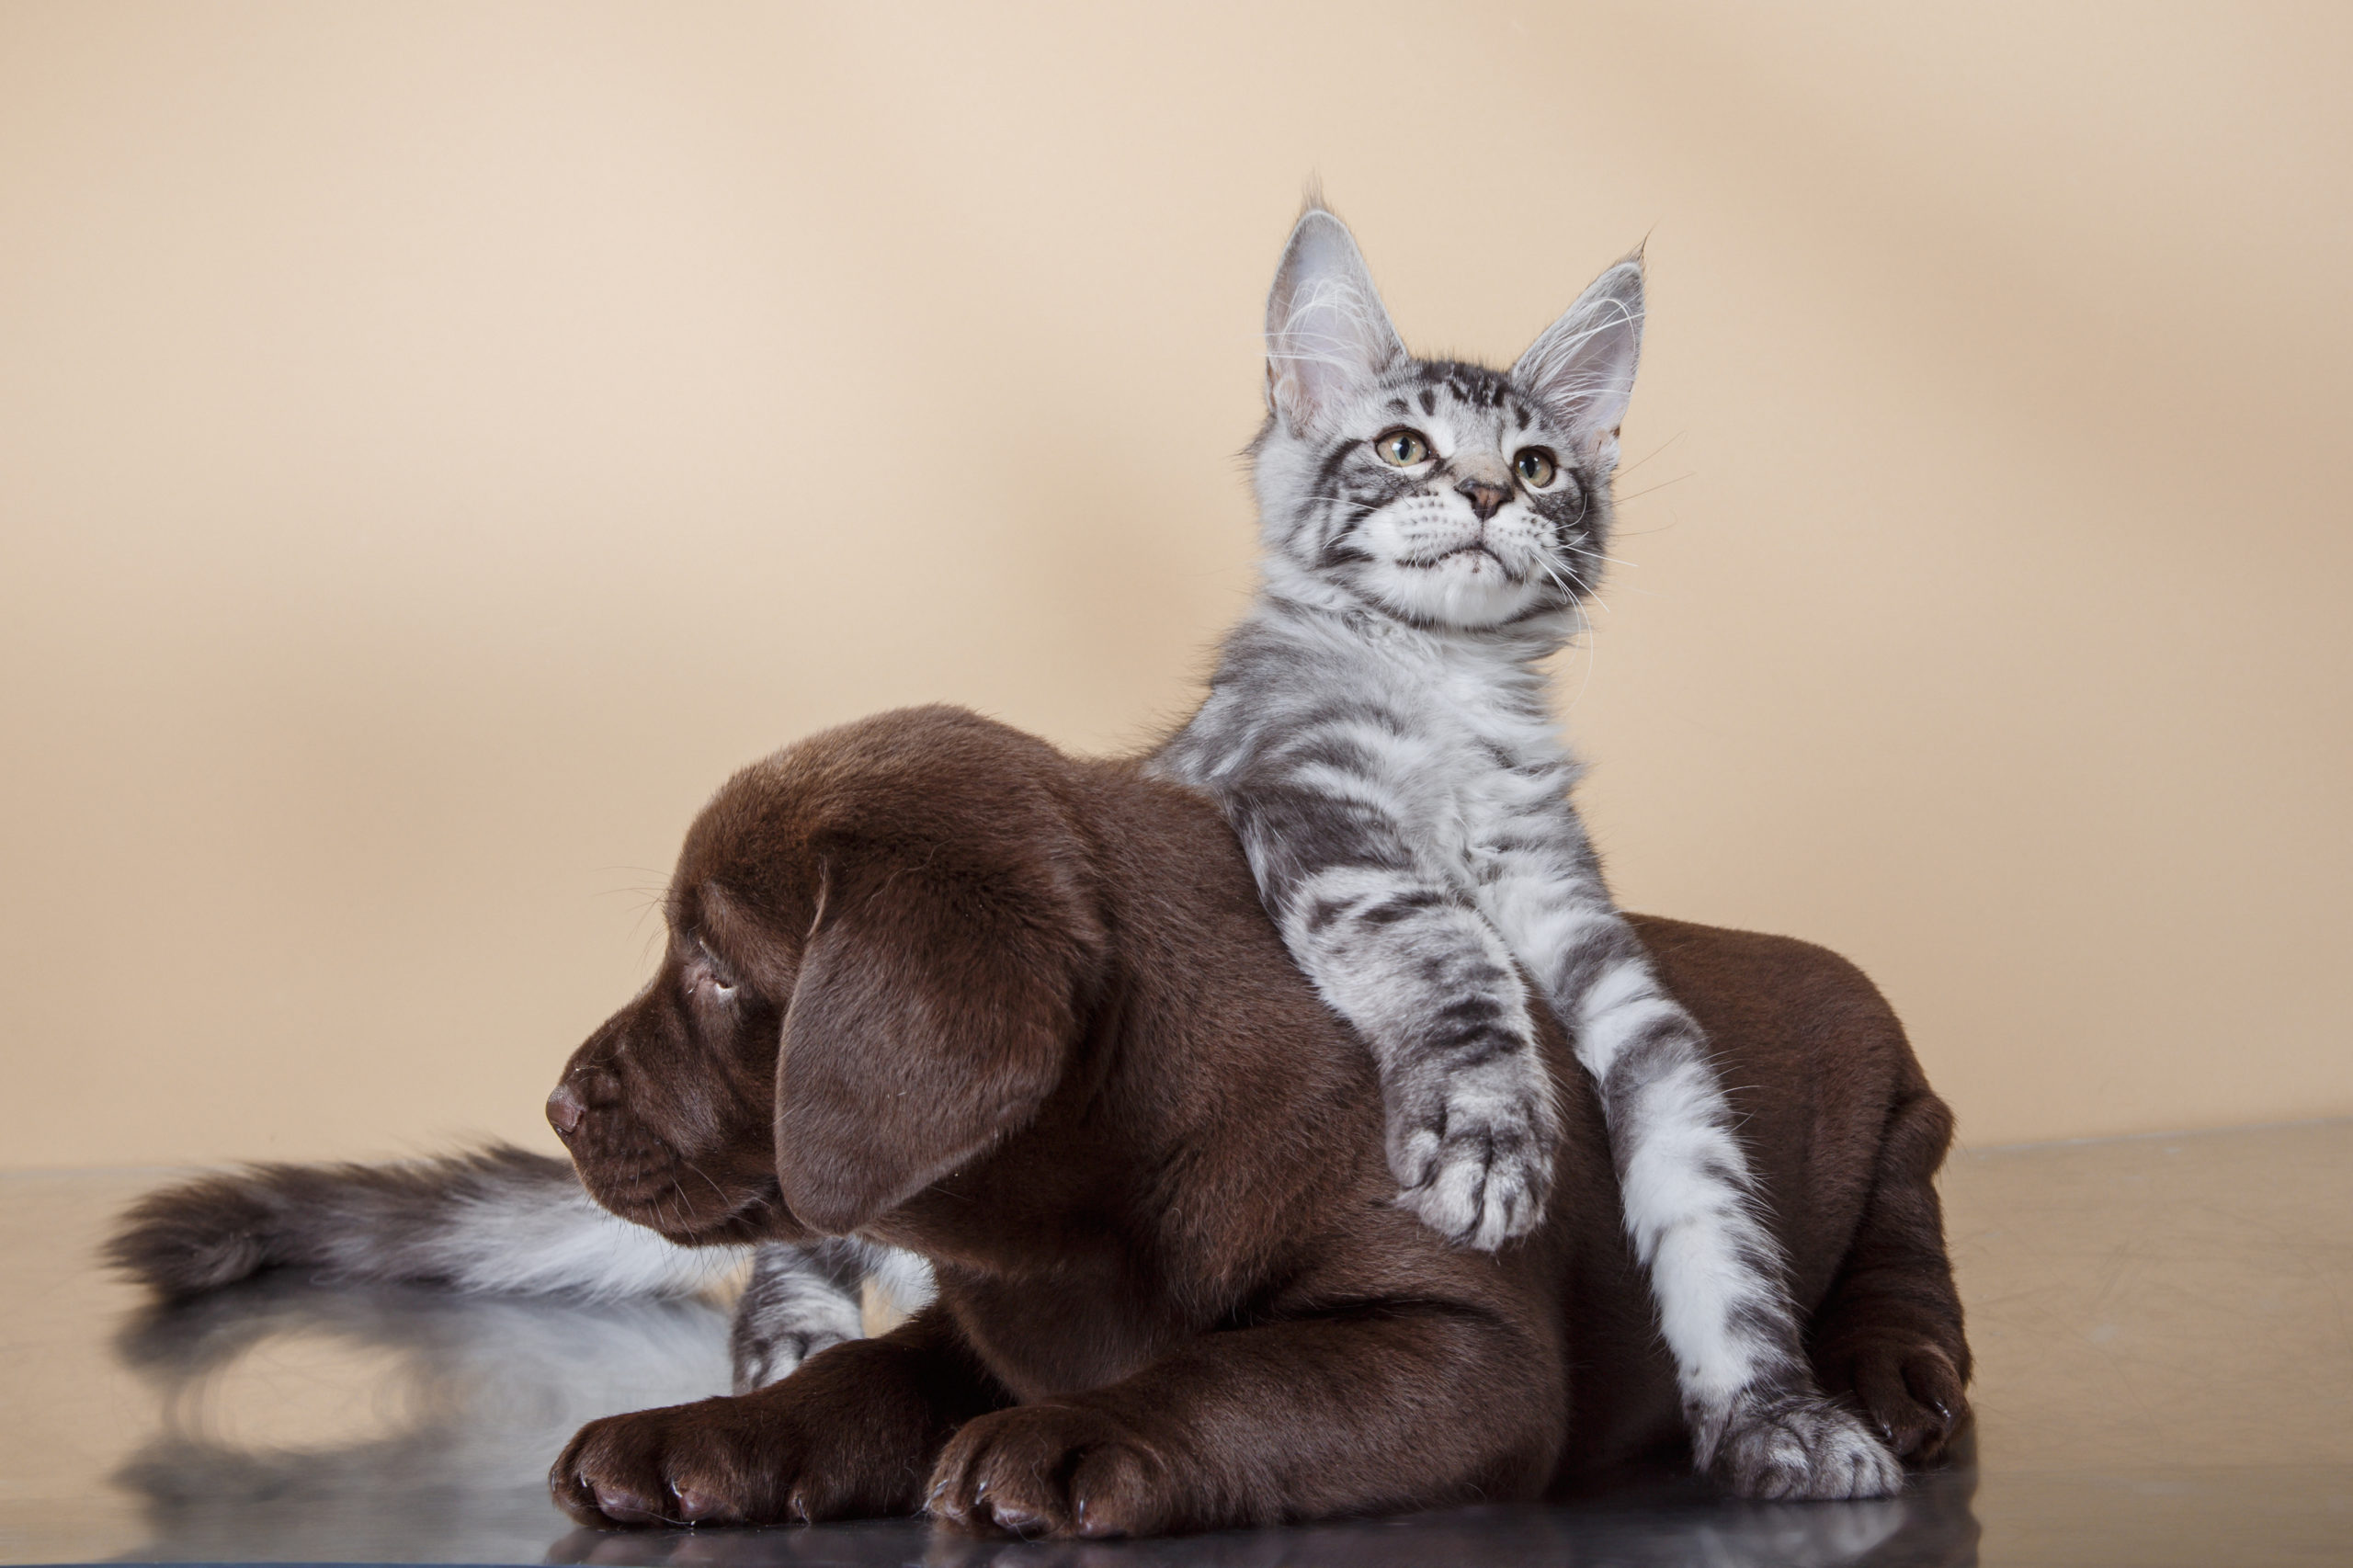 Labrador puppy and kitten breeds Maine Coon. Cat and dog